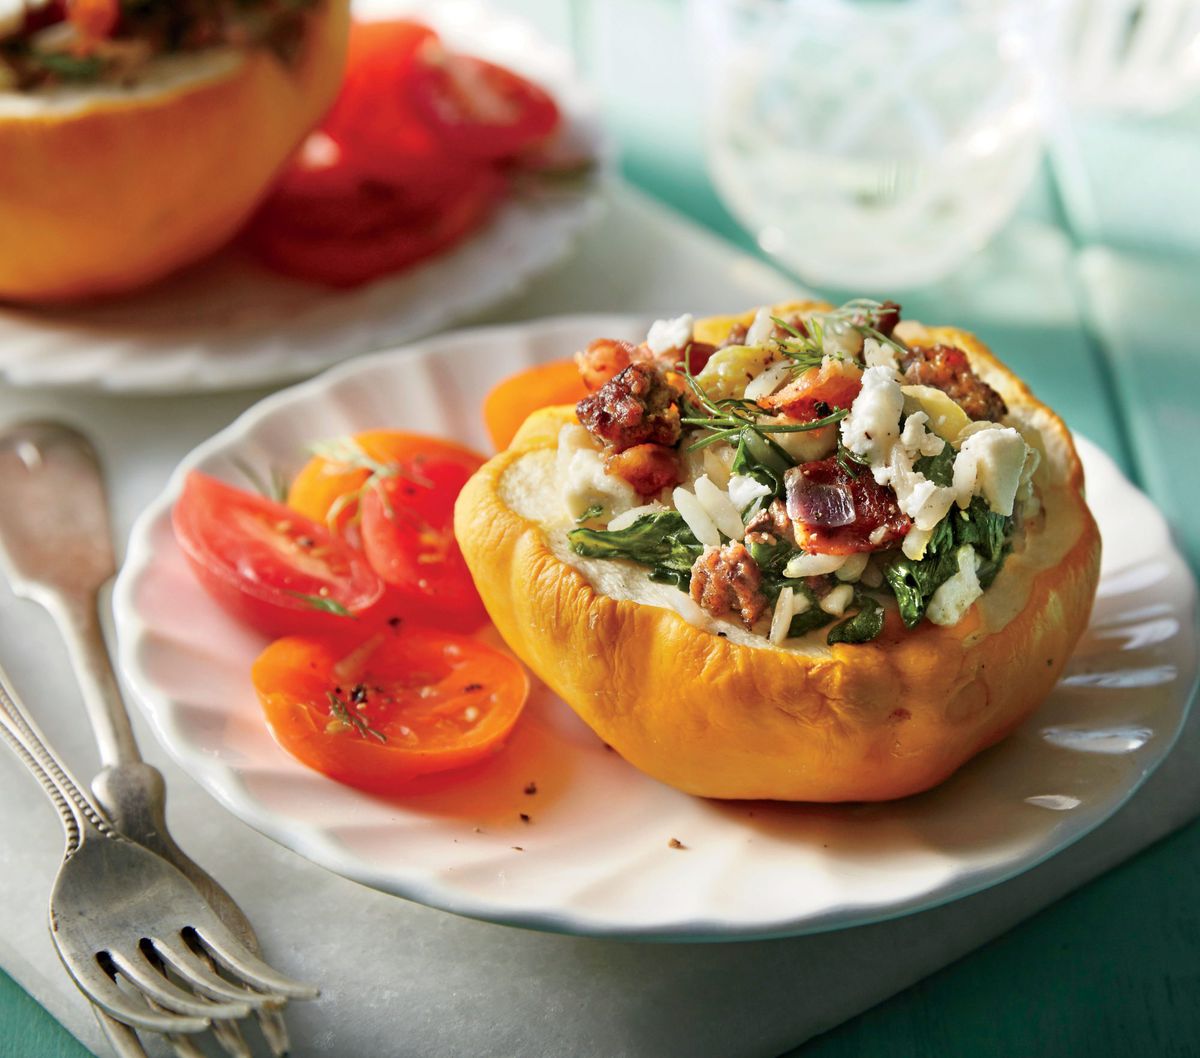 Stuffed Pattypan Squash with Beef and Feta